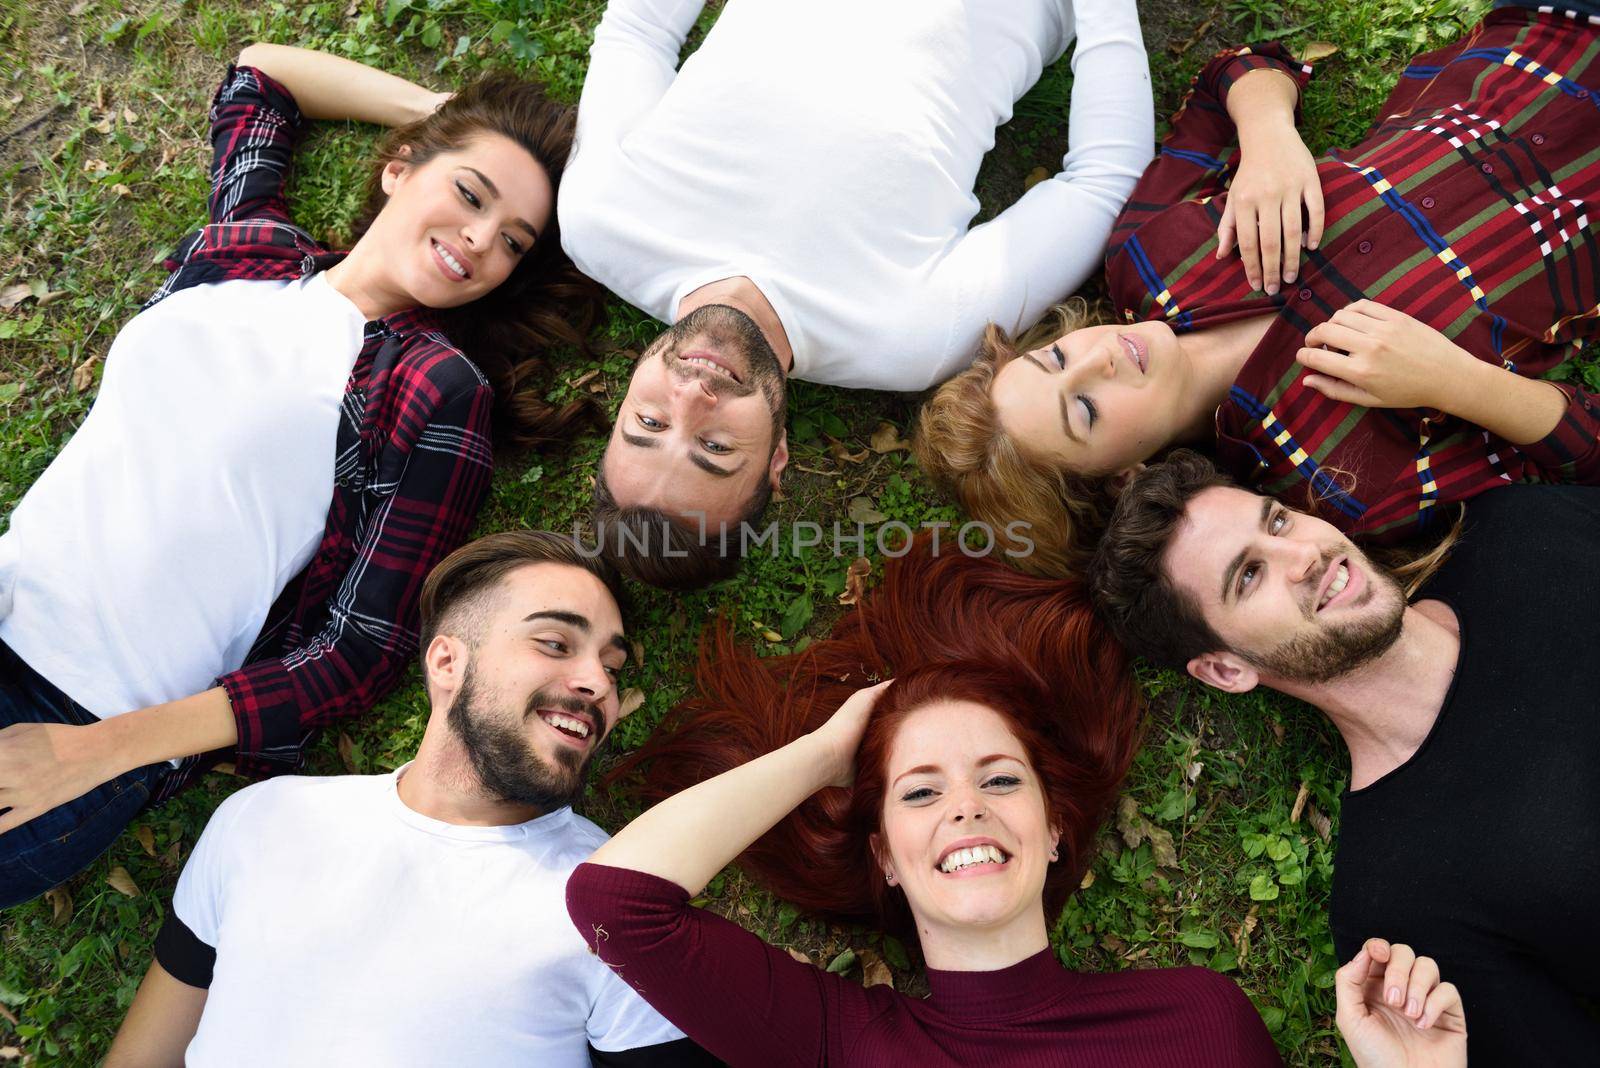 Women and men laying on grass wearing casual clothes. Group of young people together outdoors in urban park.